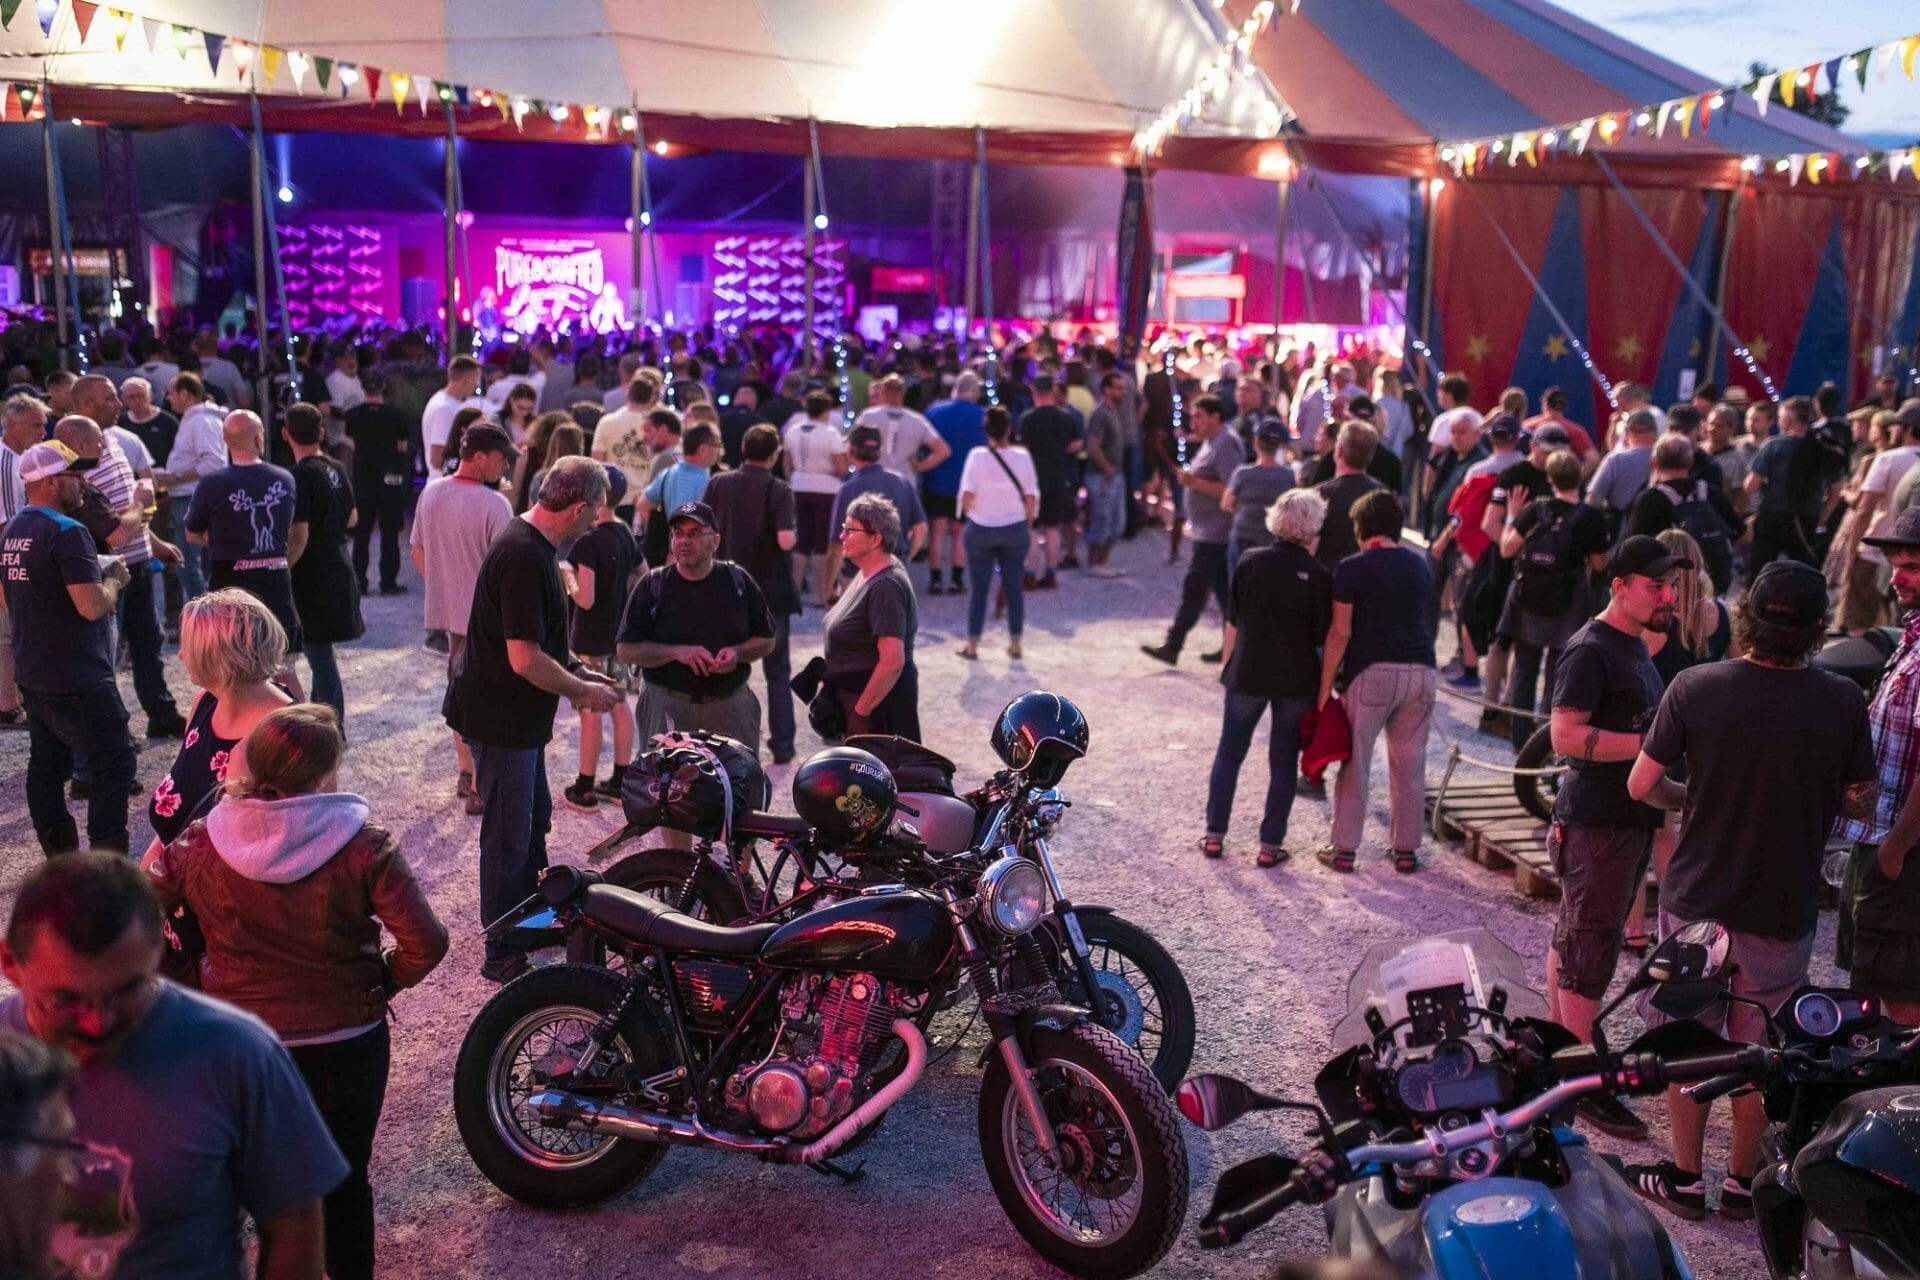 BMW Motorrad Days 2021 canceled
- also in the MOTORCYCLES.NEWS APP